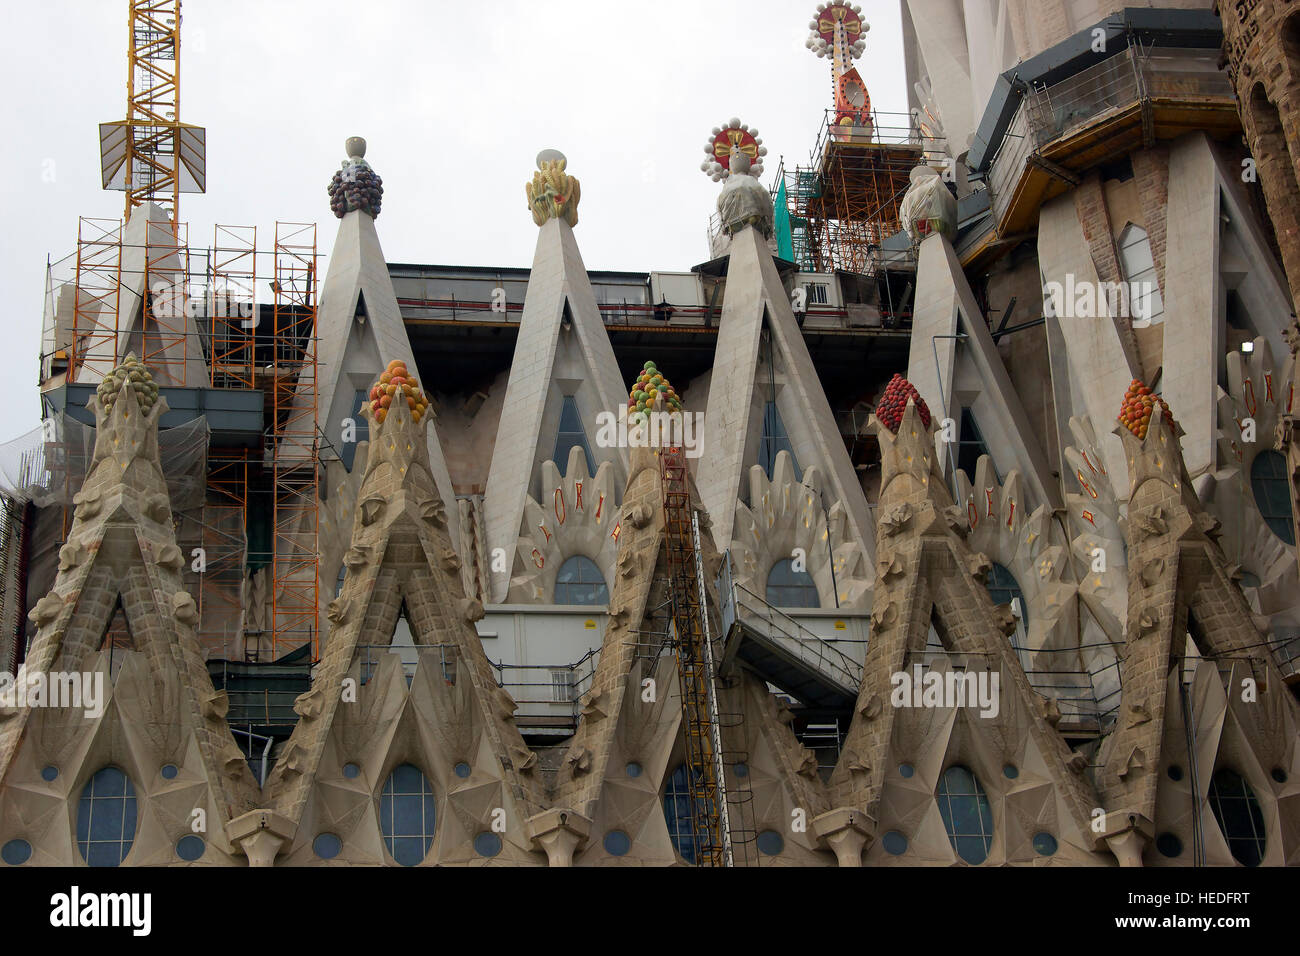 Sacred Family. Famous church under construction in Barcelona. Spain. Stock Photo